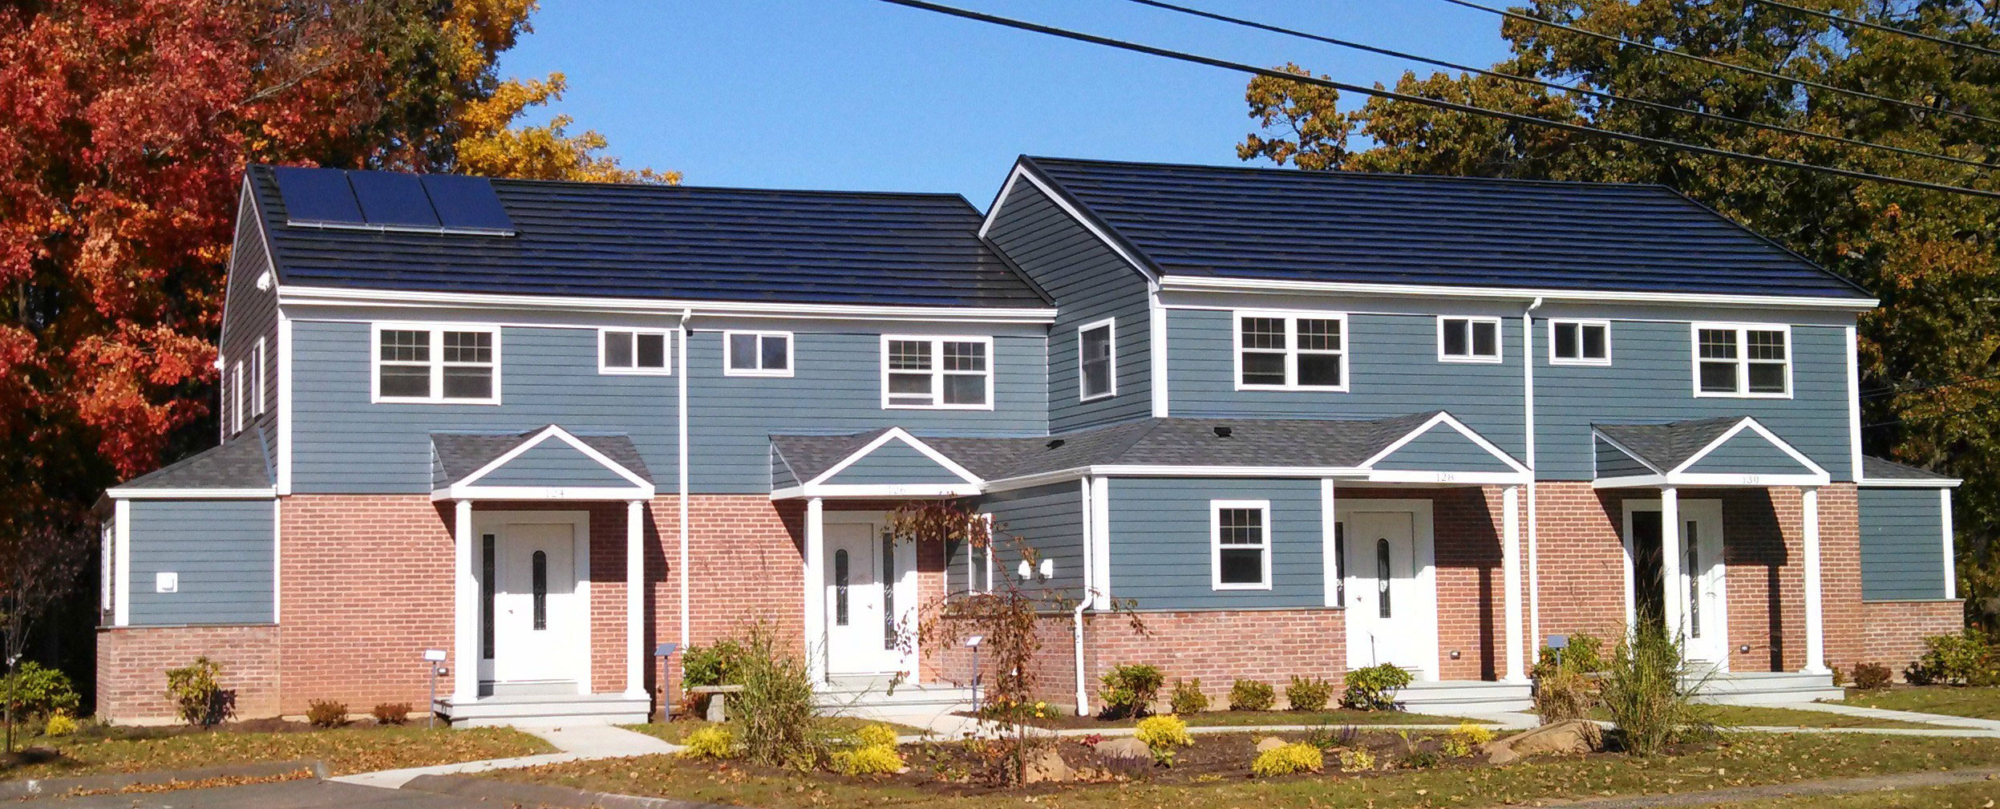 Townhouse apartments with both brick and blue clapboard siding. A solar panel on one roof. A landscaped area in front.